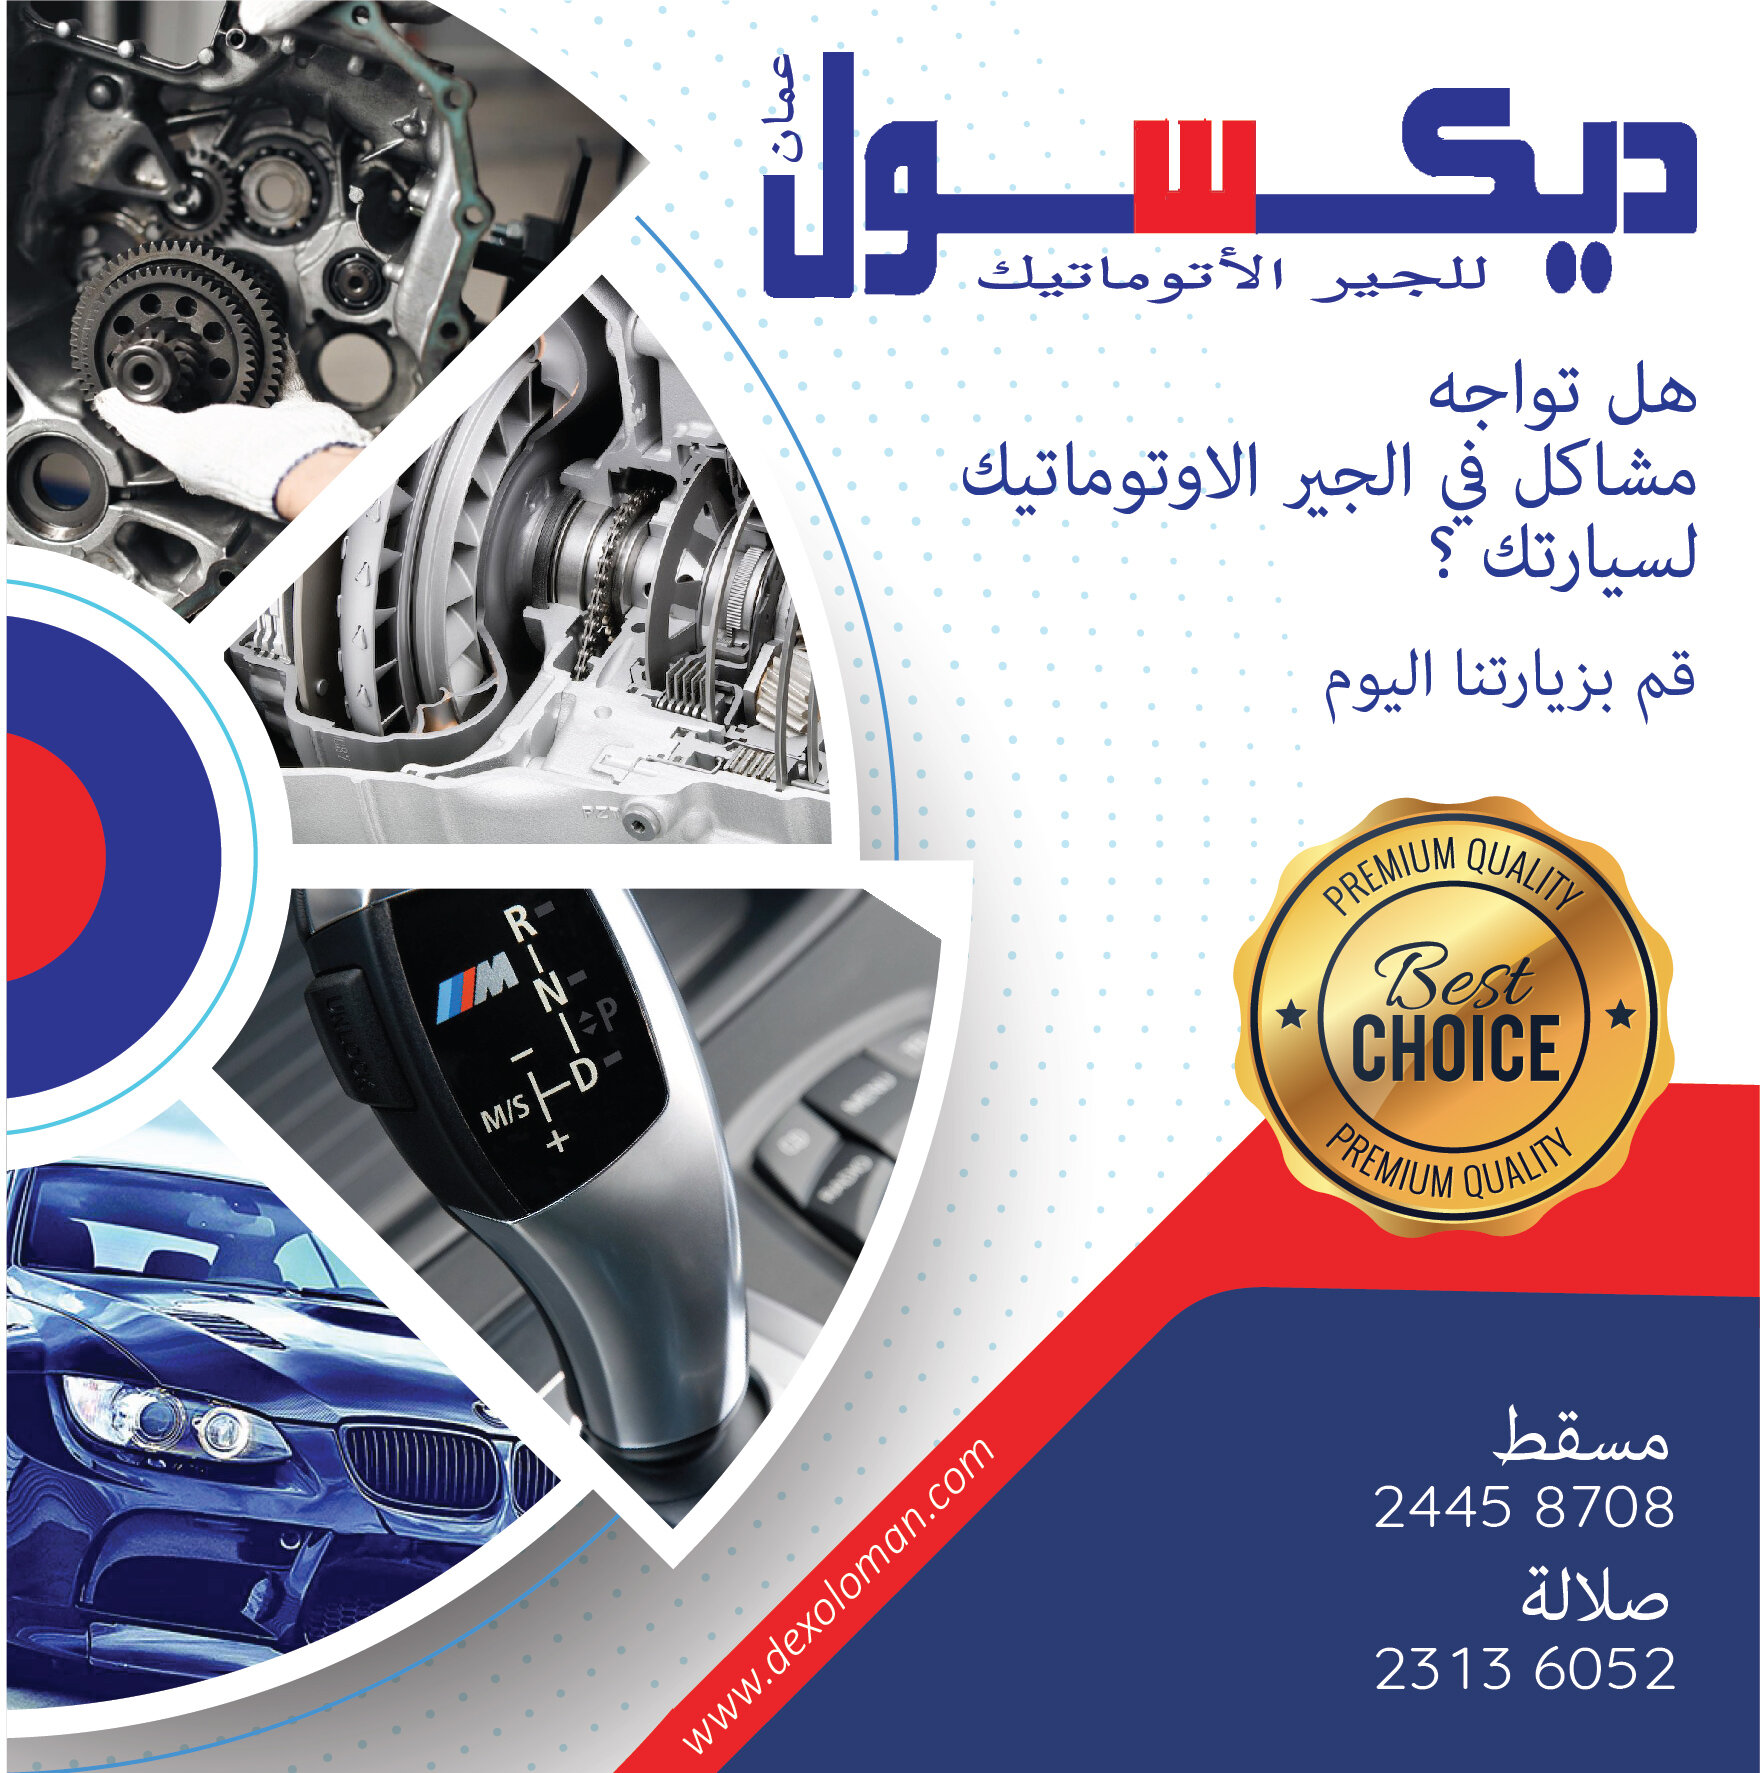 Specialists in Automatic Transmission Services